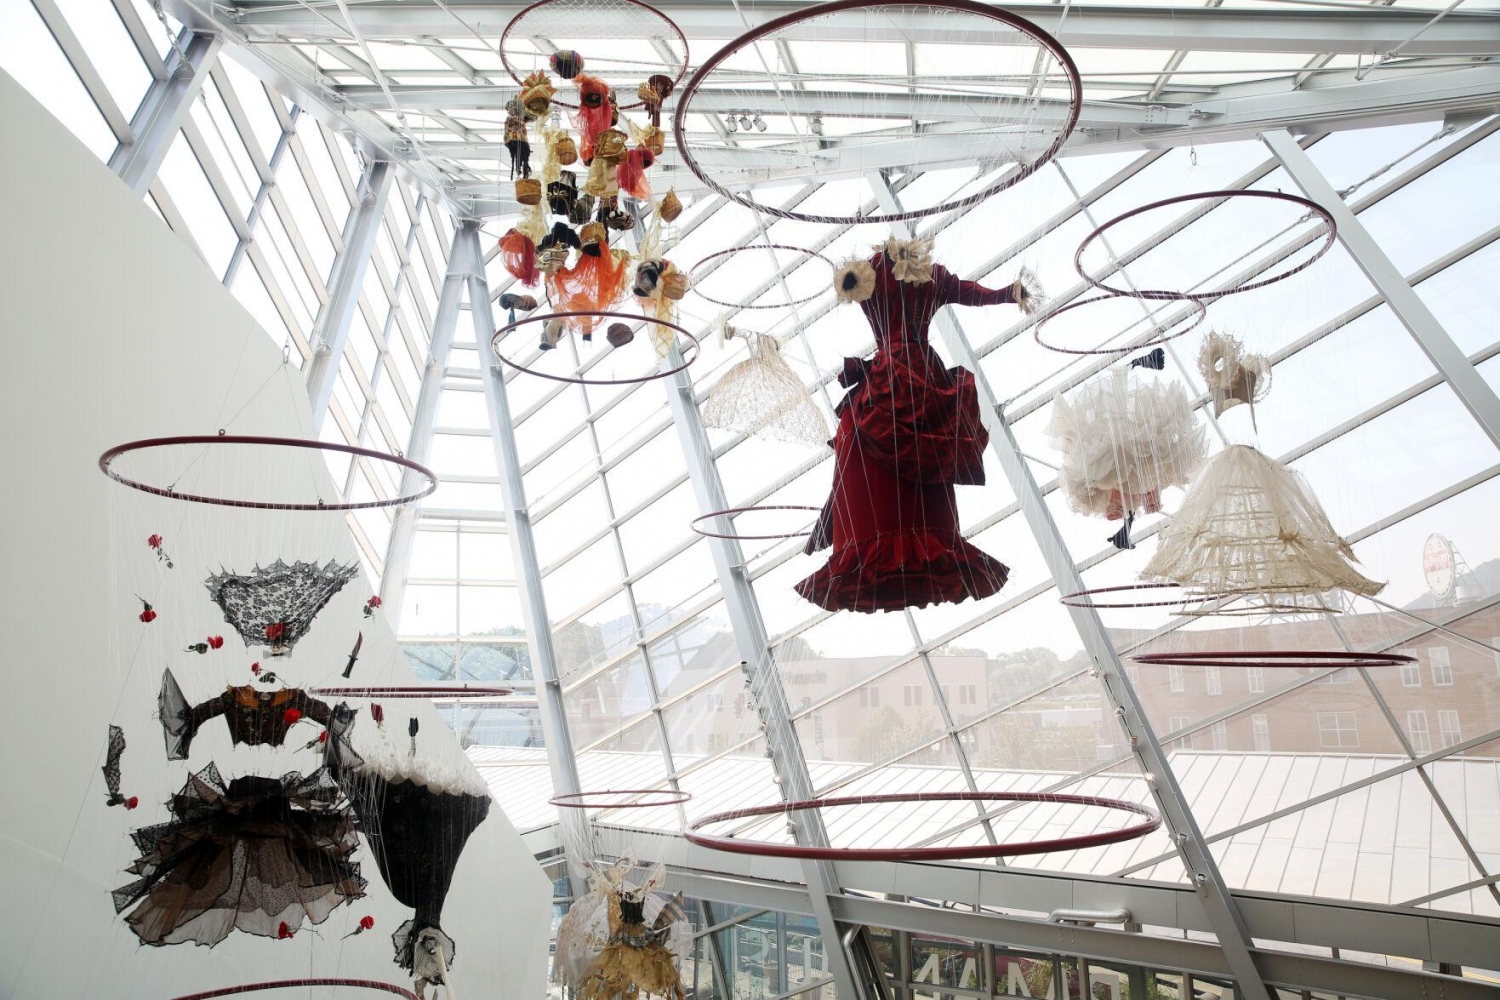 A new exhibit hangs in the Taubman Museum of Art atrium with repurposed costumes from the New York City Opera. Artist E.V. Day&rsquo;s &ldquo;Divas Ascending&rdquo; includes sculptures representing iconic women from well-known operas., Photos, Heather Rousseau, The Roanoke Times